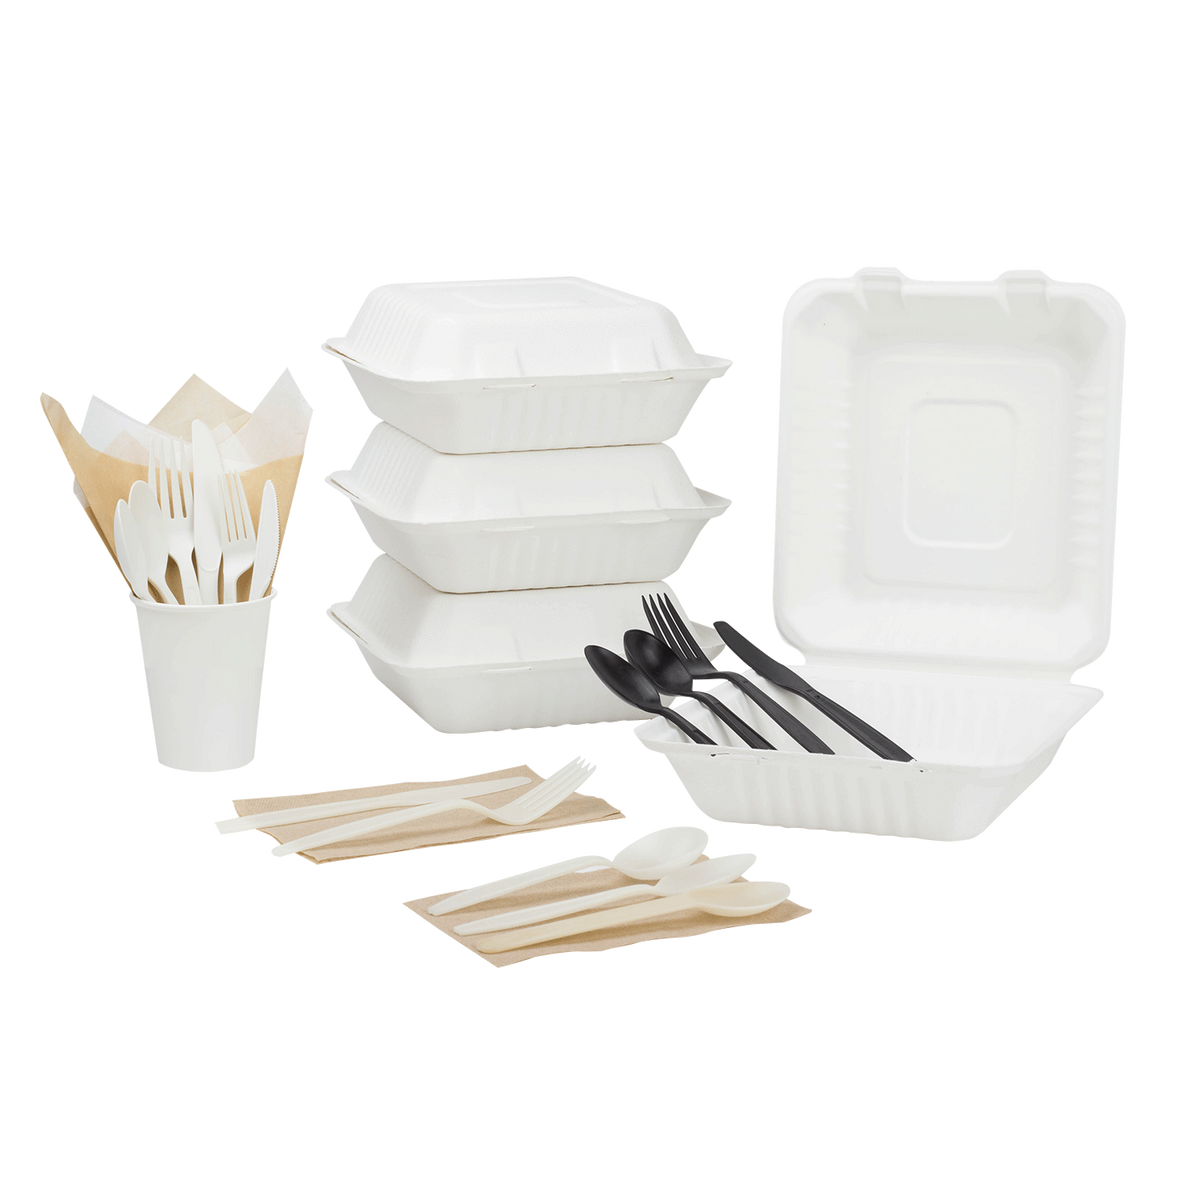 https://www.restaurantsupplydrops.shop/wp-content/uploads/1689/34/large-compostable-food-containers-karat-earth-8x8-compostable-bagasse-hinged-containers-200-ct-karat-discover-the-world-of-possibilities-take-a-look-at-our-large-selection_9.png